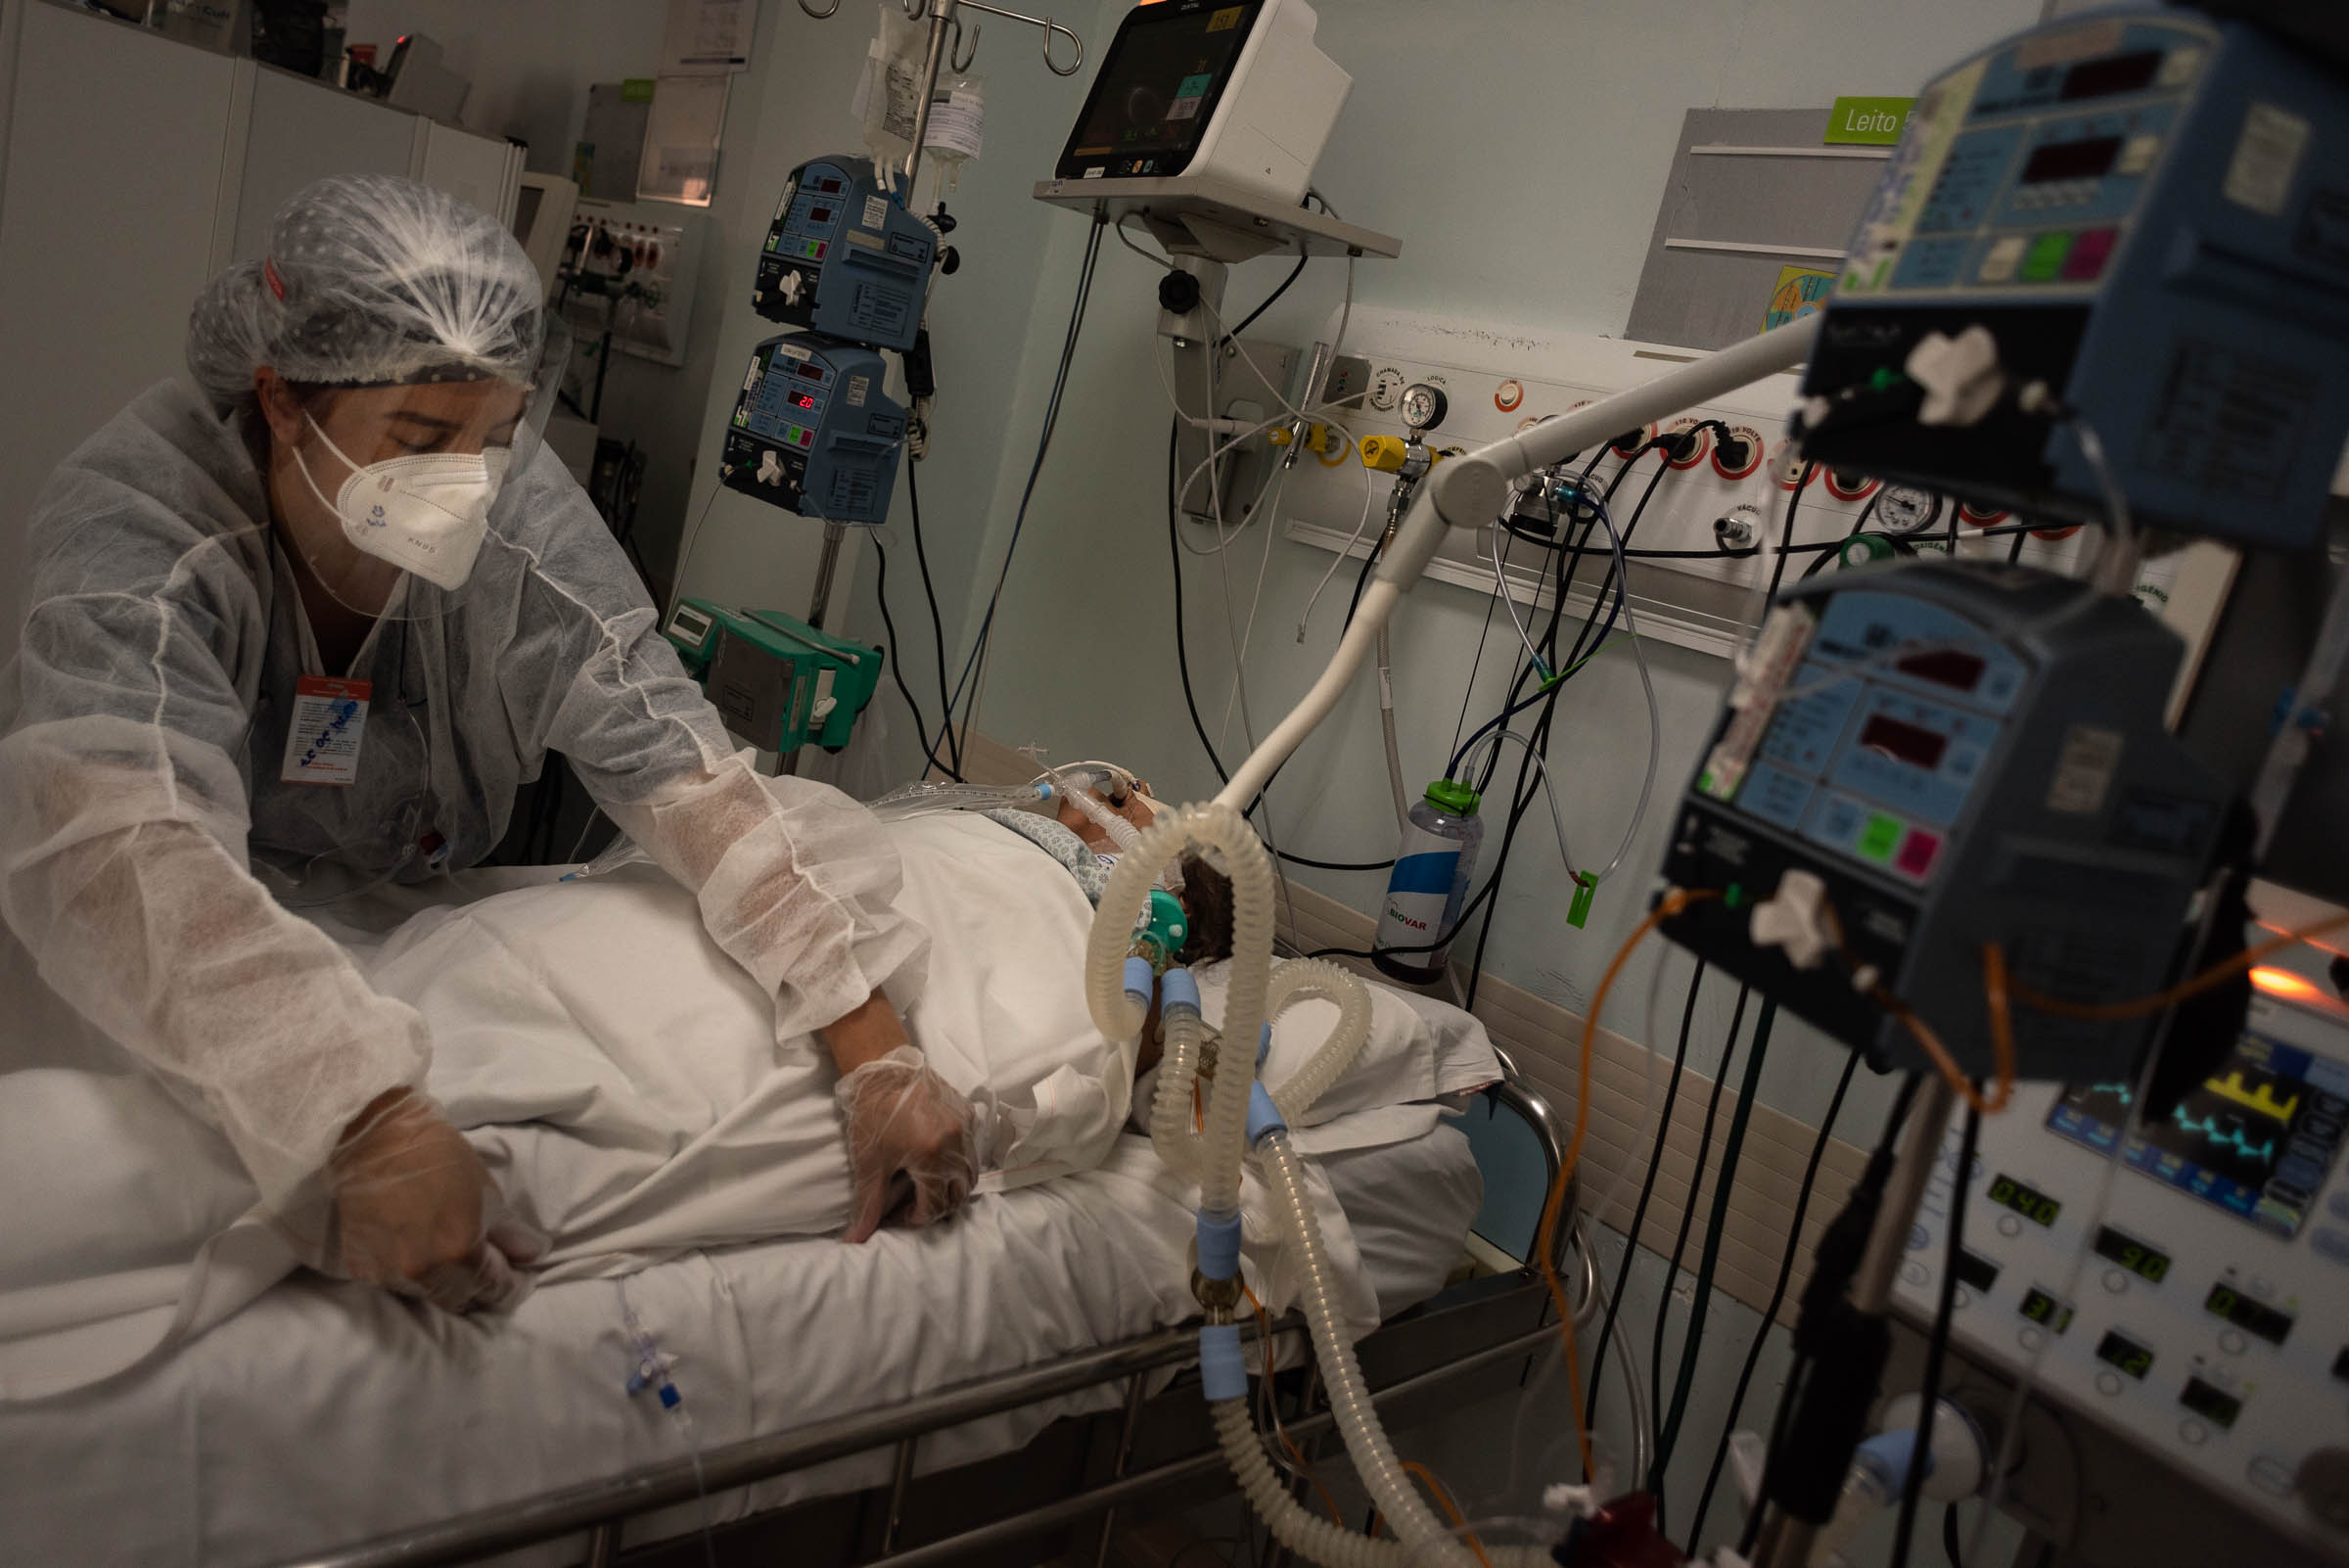 A medic in PPE providing care for a COVID patient in a hospital setting.